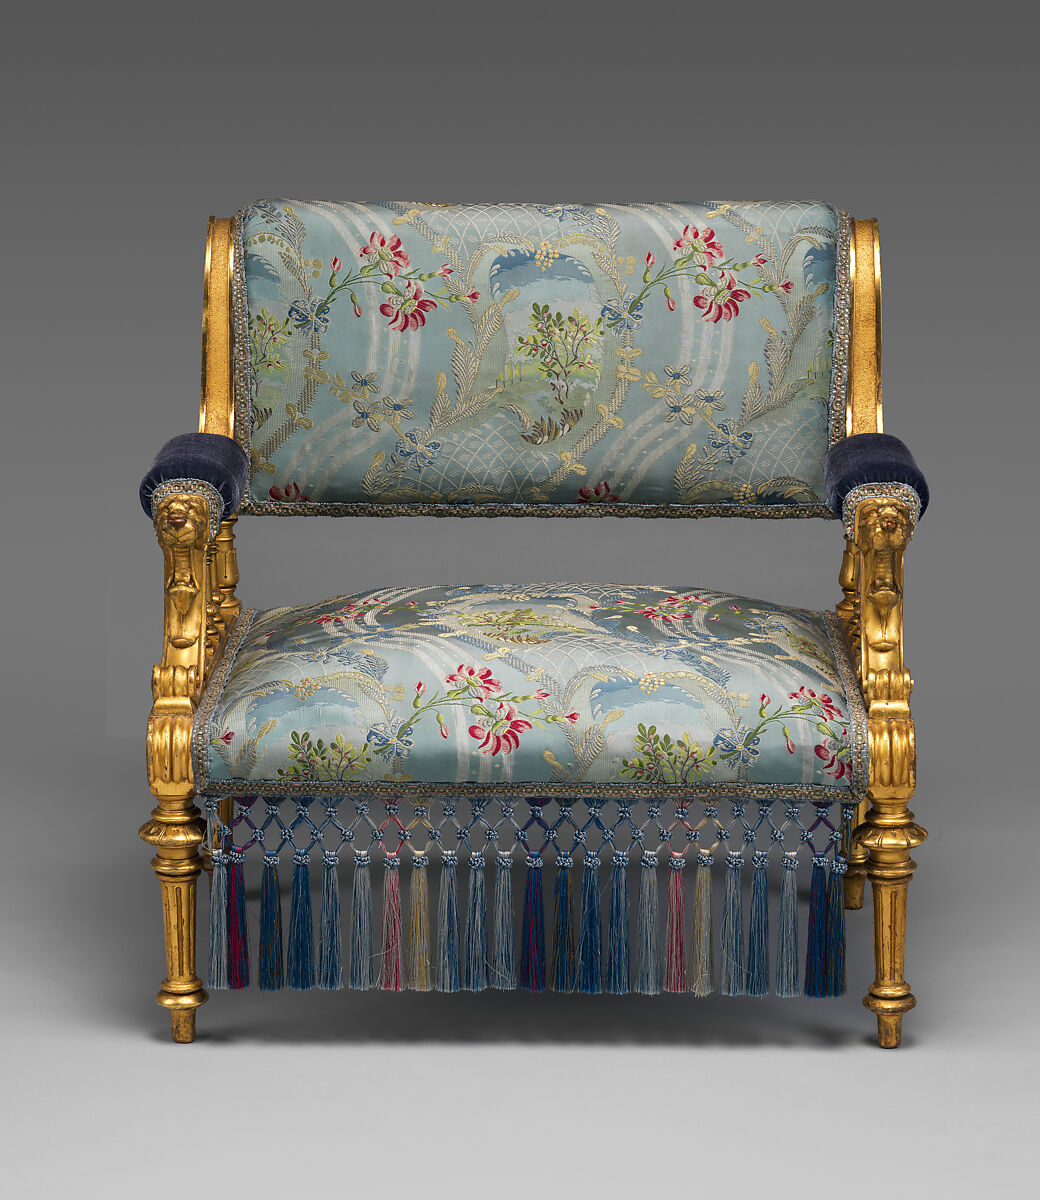 Armchair, Herter Brothers (German, active New York, 1864–1906), Gilded wood (probably cherry, maple or ash), modern upholstery with original underupholstery materials, American 